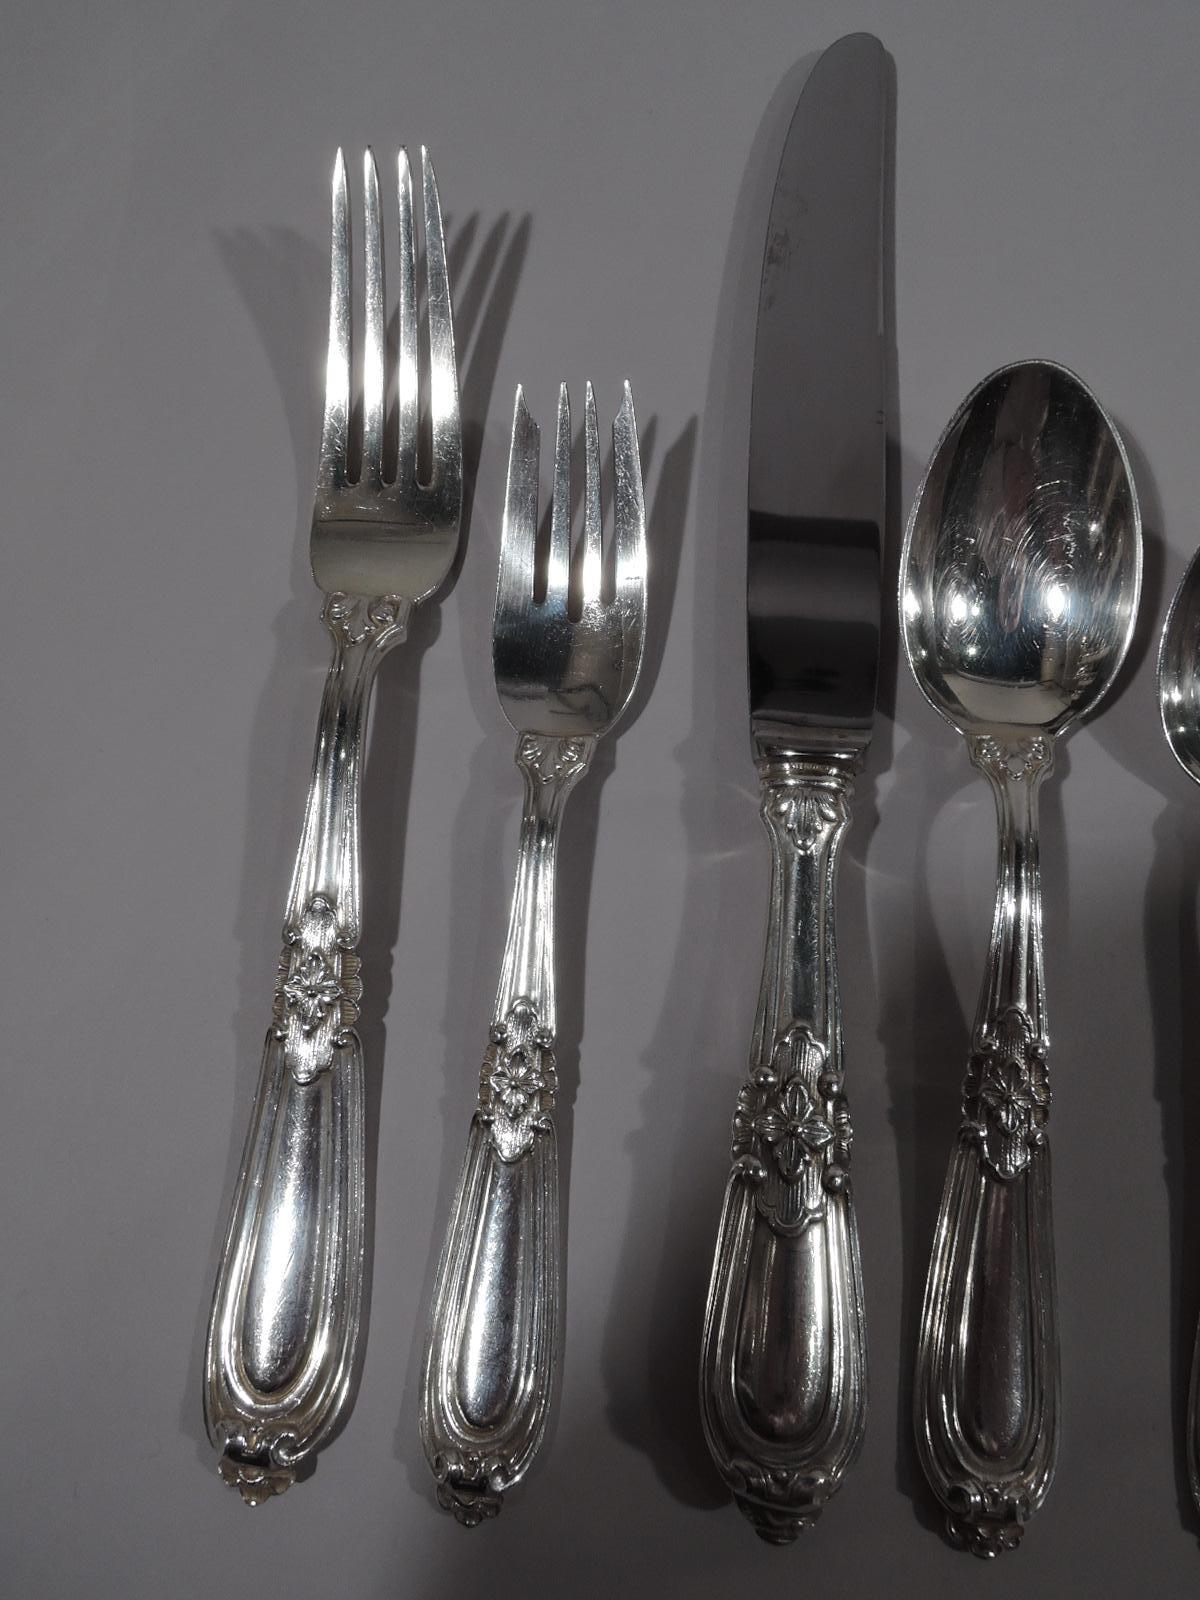 Esteval sterling silver dinner set for 12. Made by Buccellati in Milan, circa 1950. This set comprises 77 pieces pieces (dimensions in inches): Forks: 12 dinner forks (8 5/8) and 12 salad forks (6 7/8); Spoons: 12 soup spoons (6 7/8) and 24